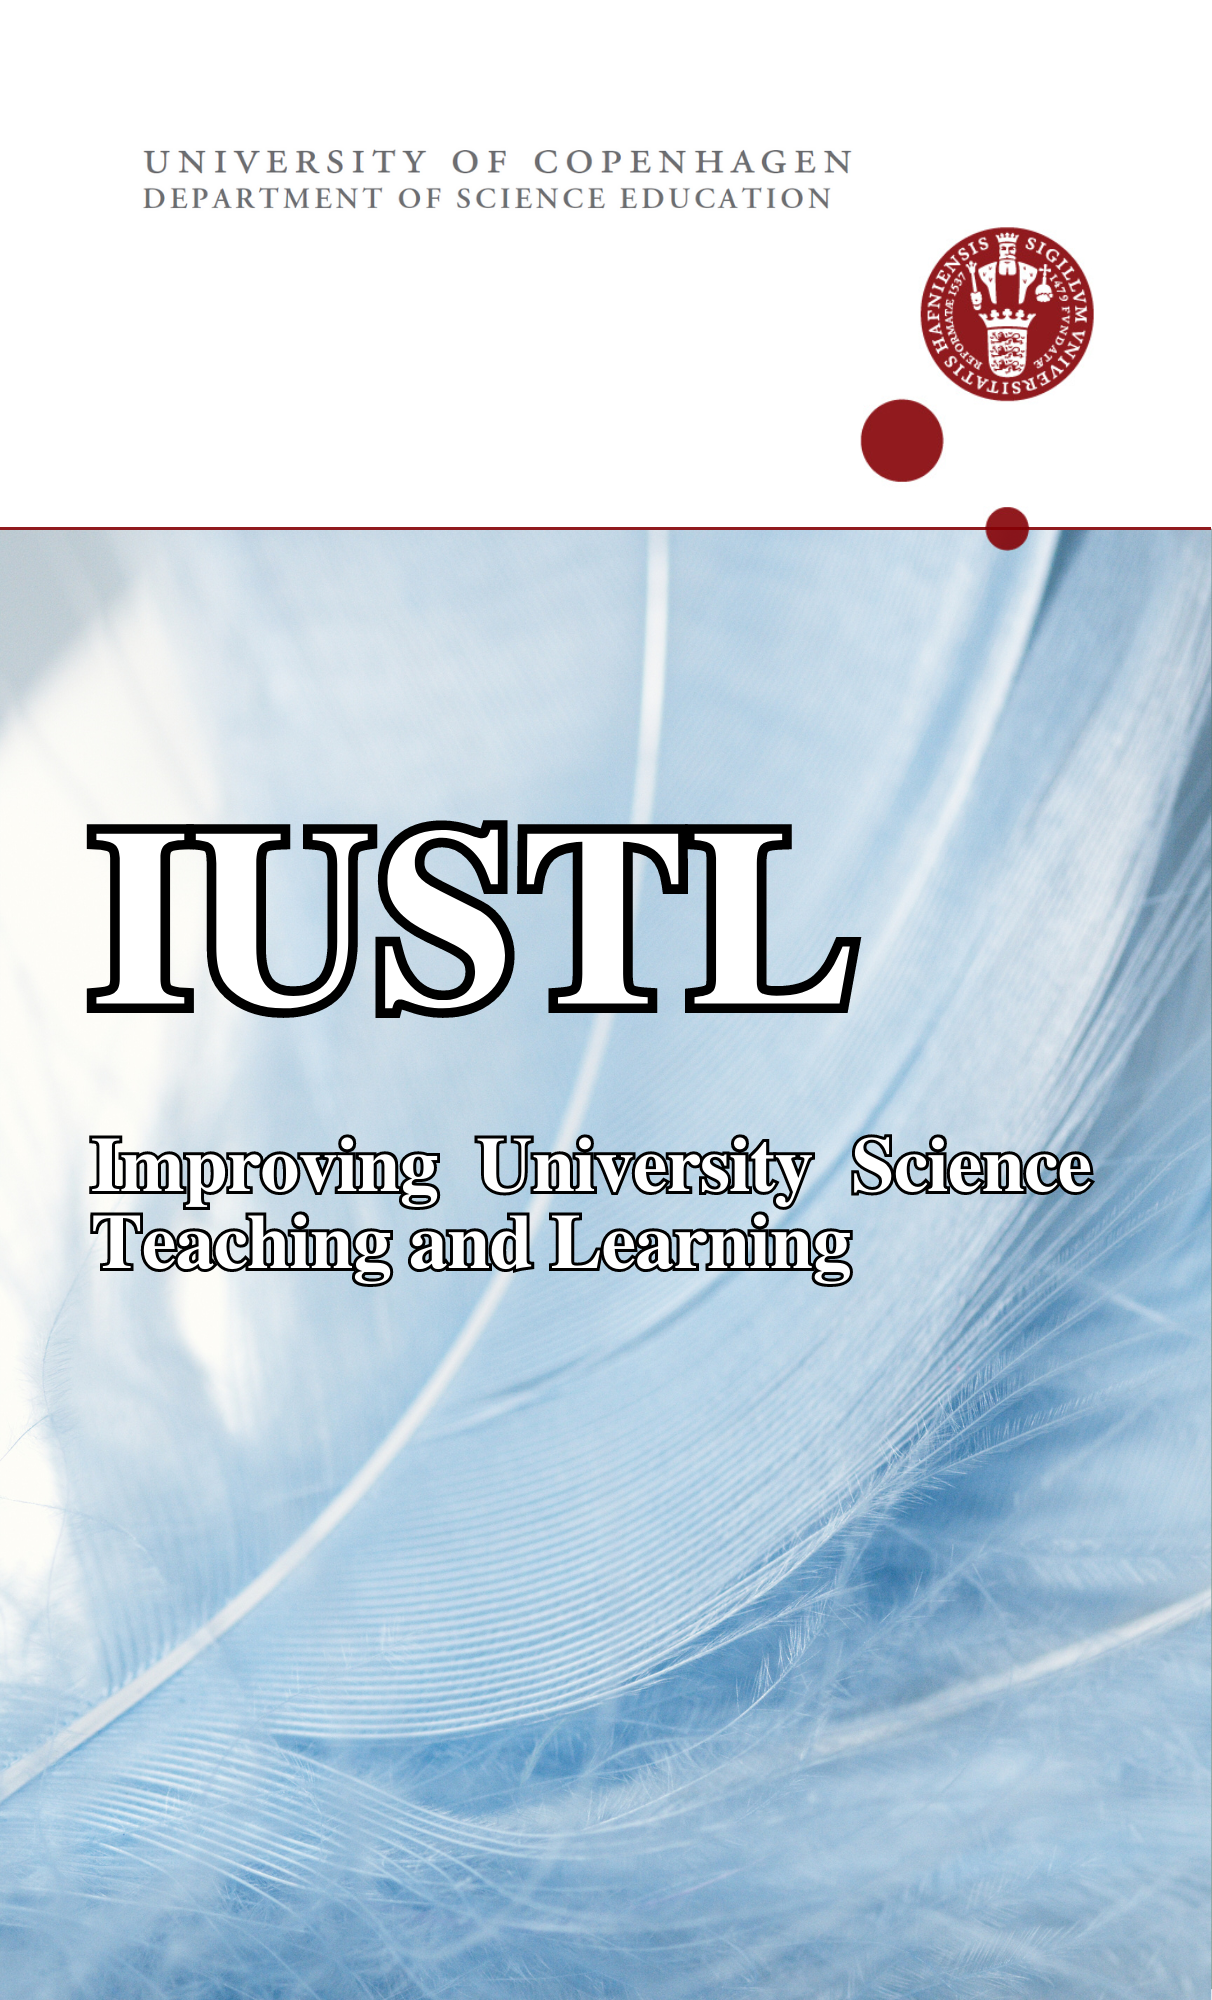 IUSTL - Improving University Science Teaching and Learning